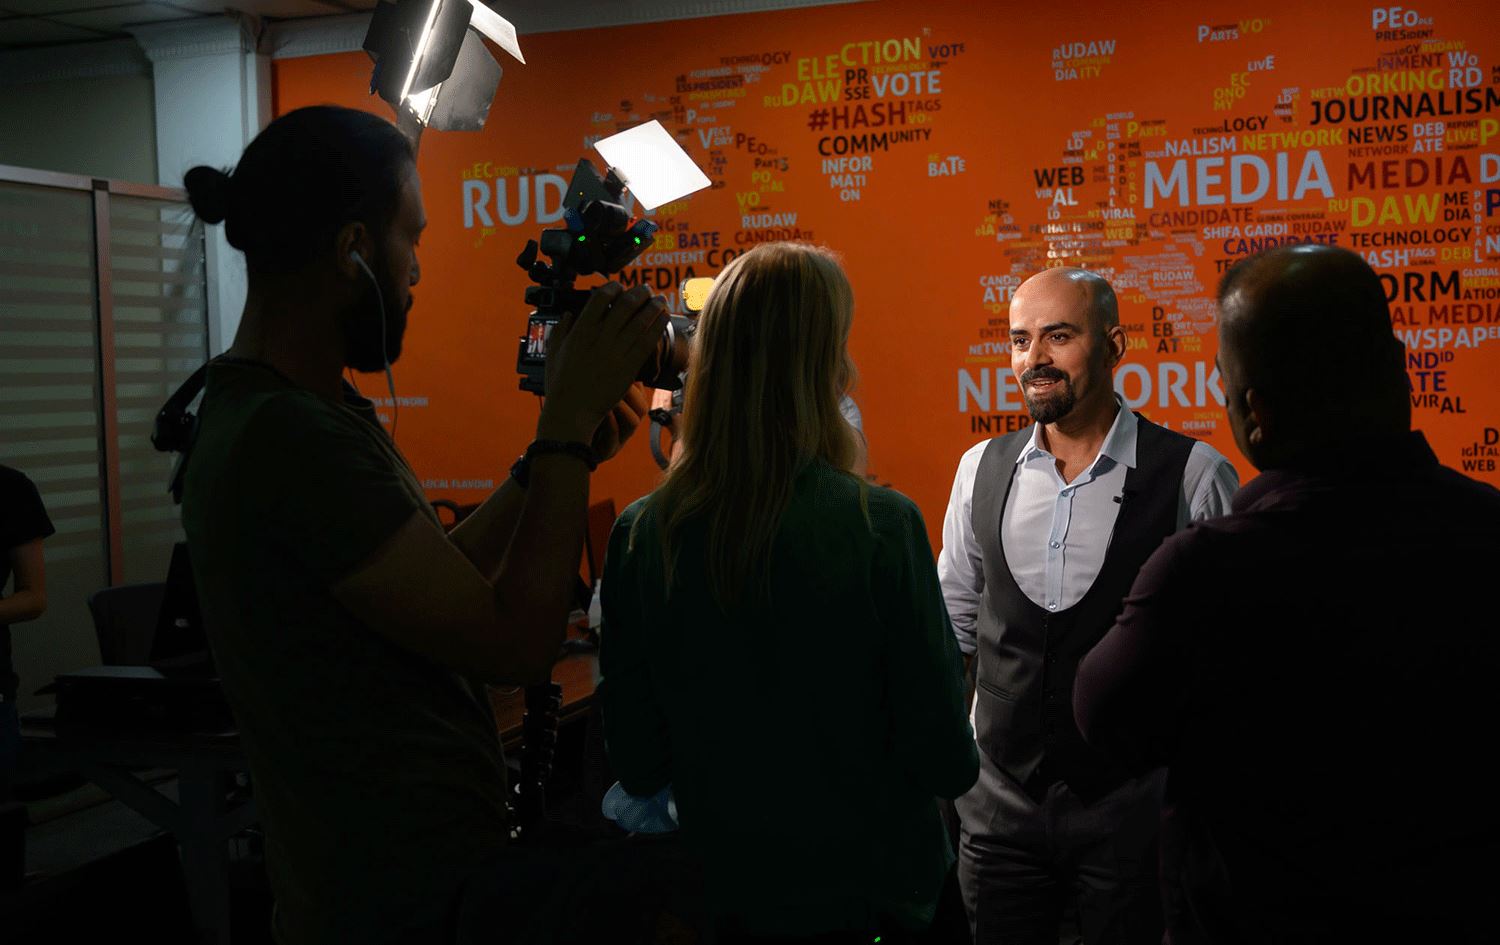 Image: Rudaw: Leading with Integrity, Innovating for Impact, Inspiring the World